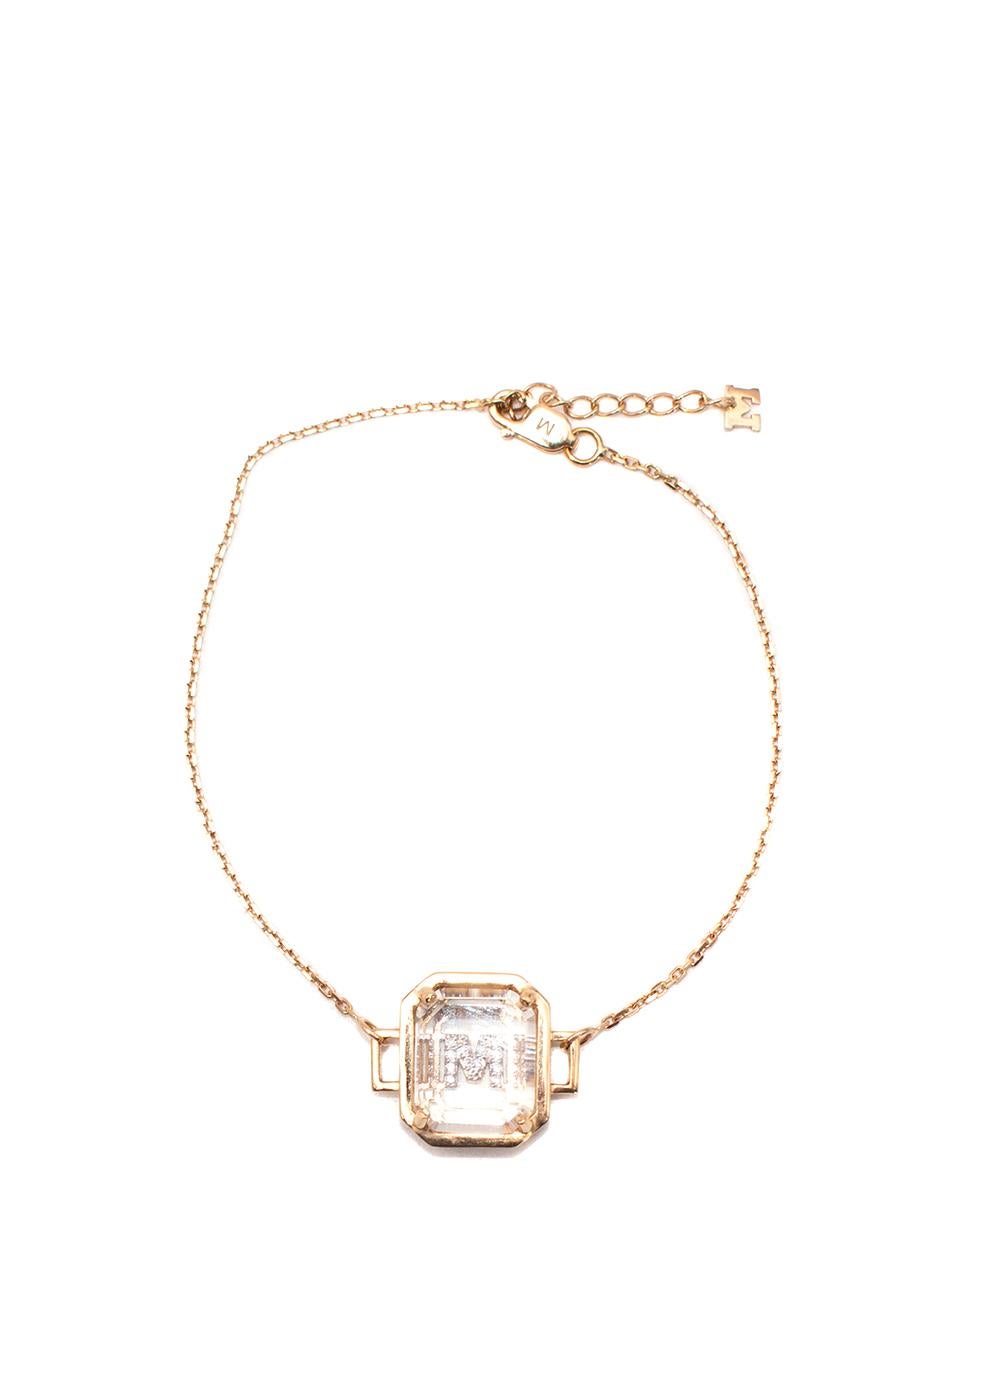 Mateo 14ct gold frame quartz crystal diamond initial pendant bracelet

- 14ct yellow frame and chain 
- Clear quartz body, with white diamond M initial 
-Rolo chain
-Lobster claw fastening

Composition:
Gold
Quartz
Diamond

9.5/10 excellent